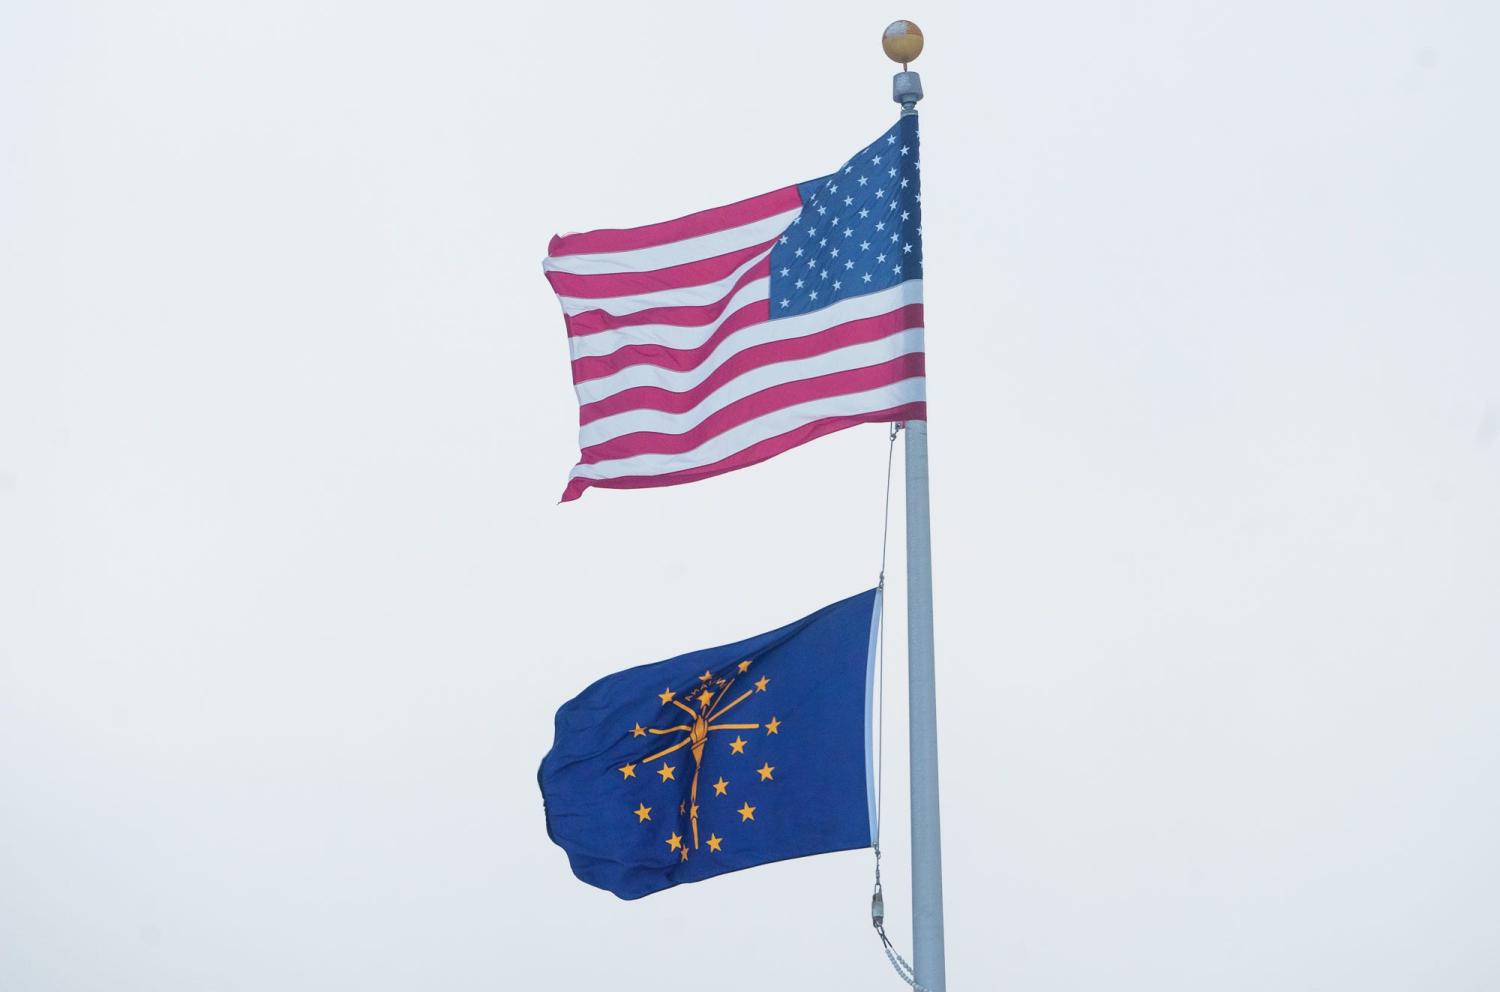 An American and State of Indiana flag fly Friday, Dec. 23, 2022, during a frigidly cold day in Central Indiana.